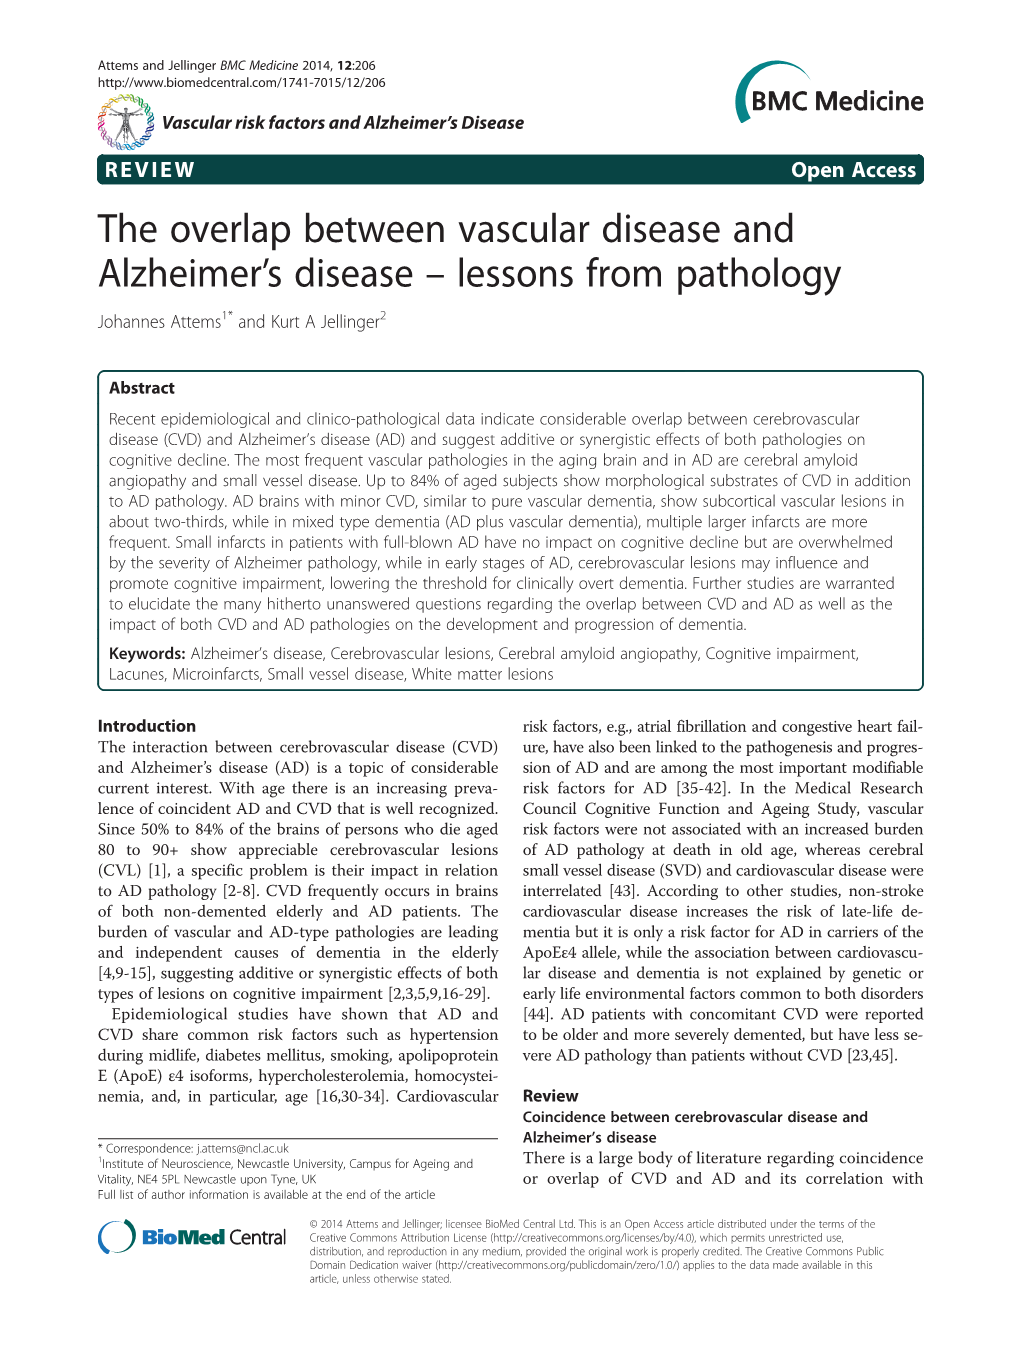 VIEW Open Access the Overlap Between Vascular Disease and Alzheimer’S Disease – Lessons from Pathology Johannes Attems1* and Kurt a Jellinger2